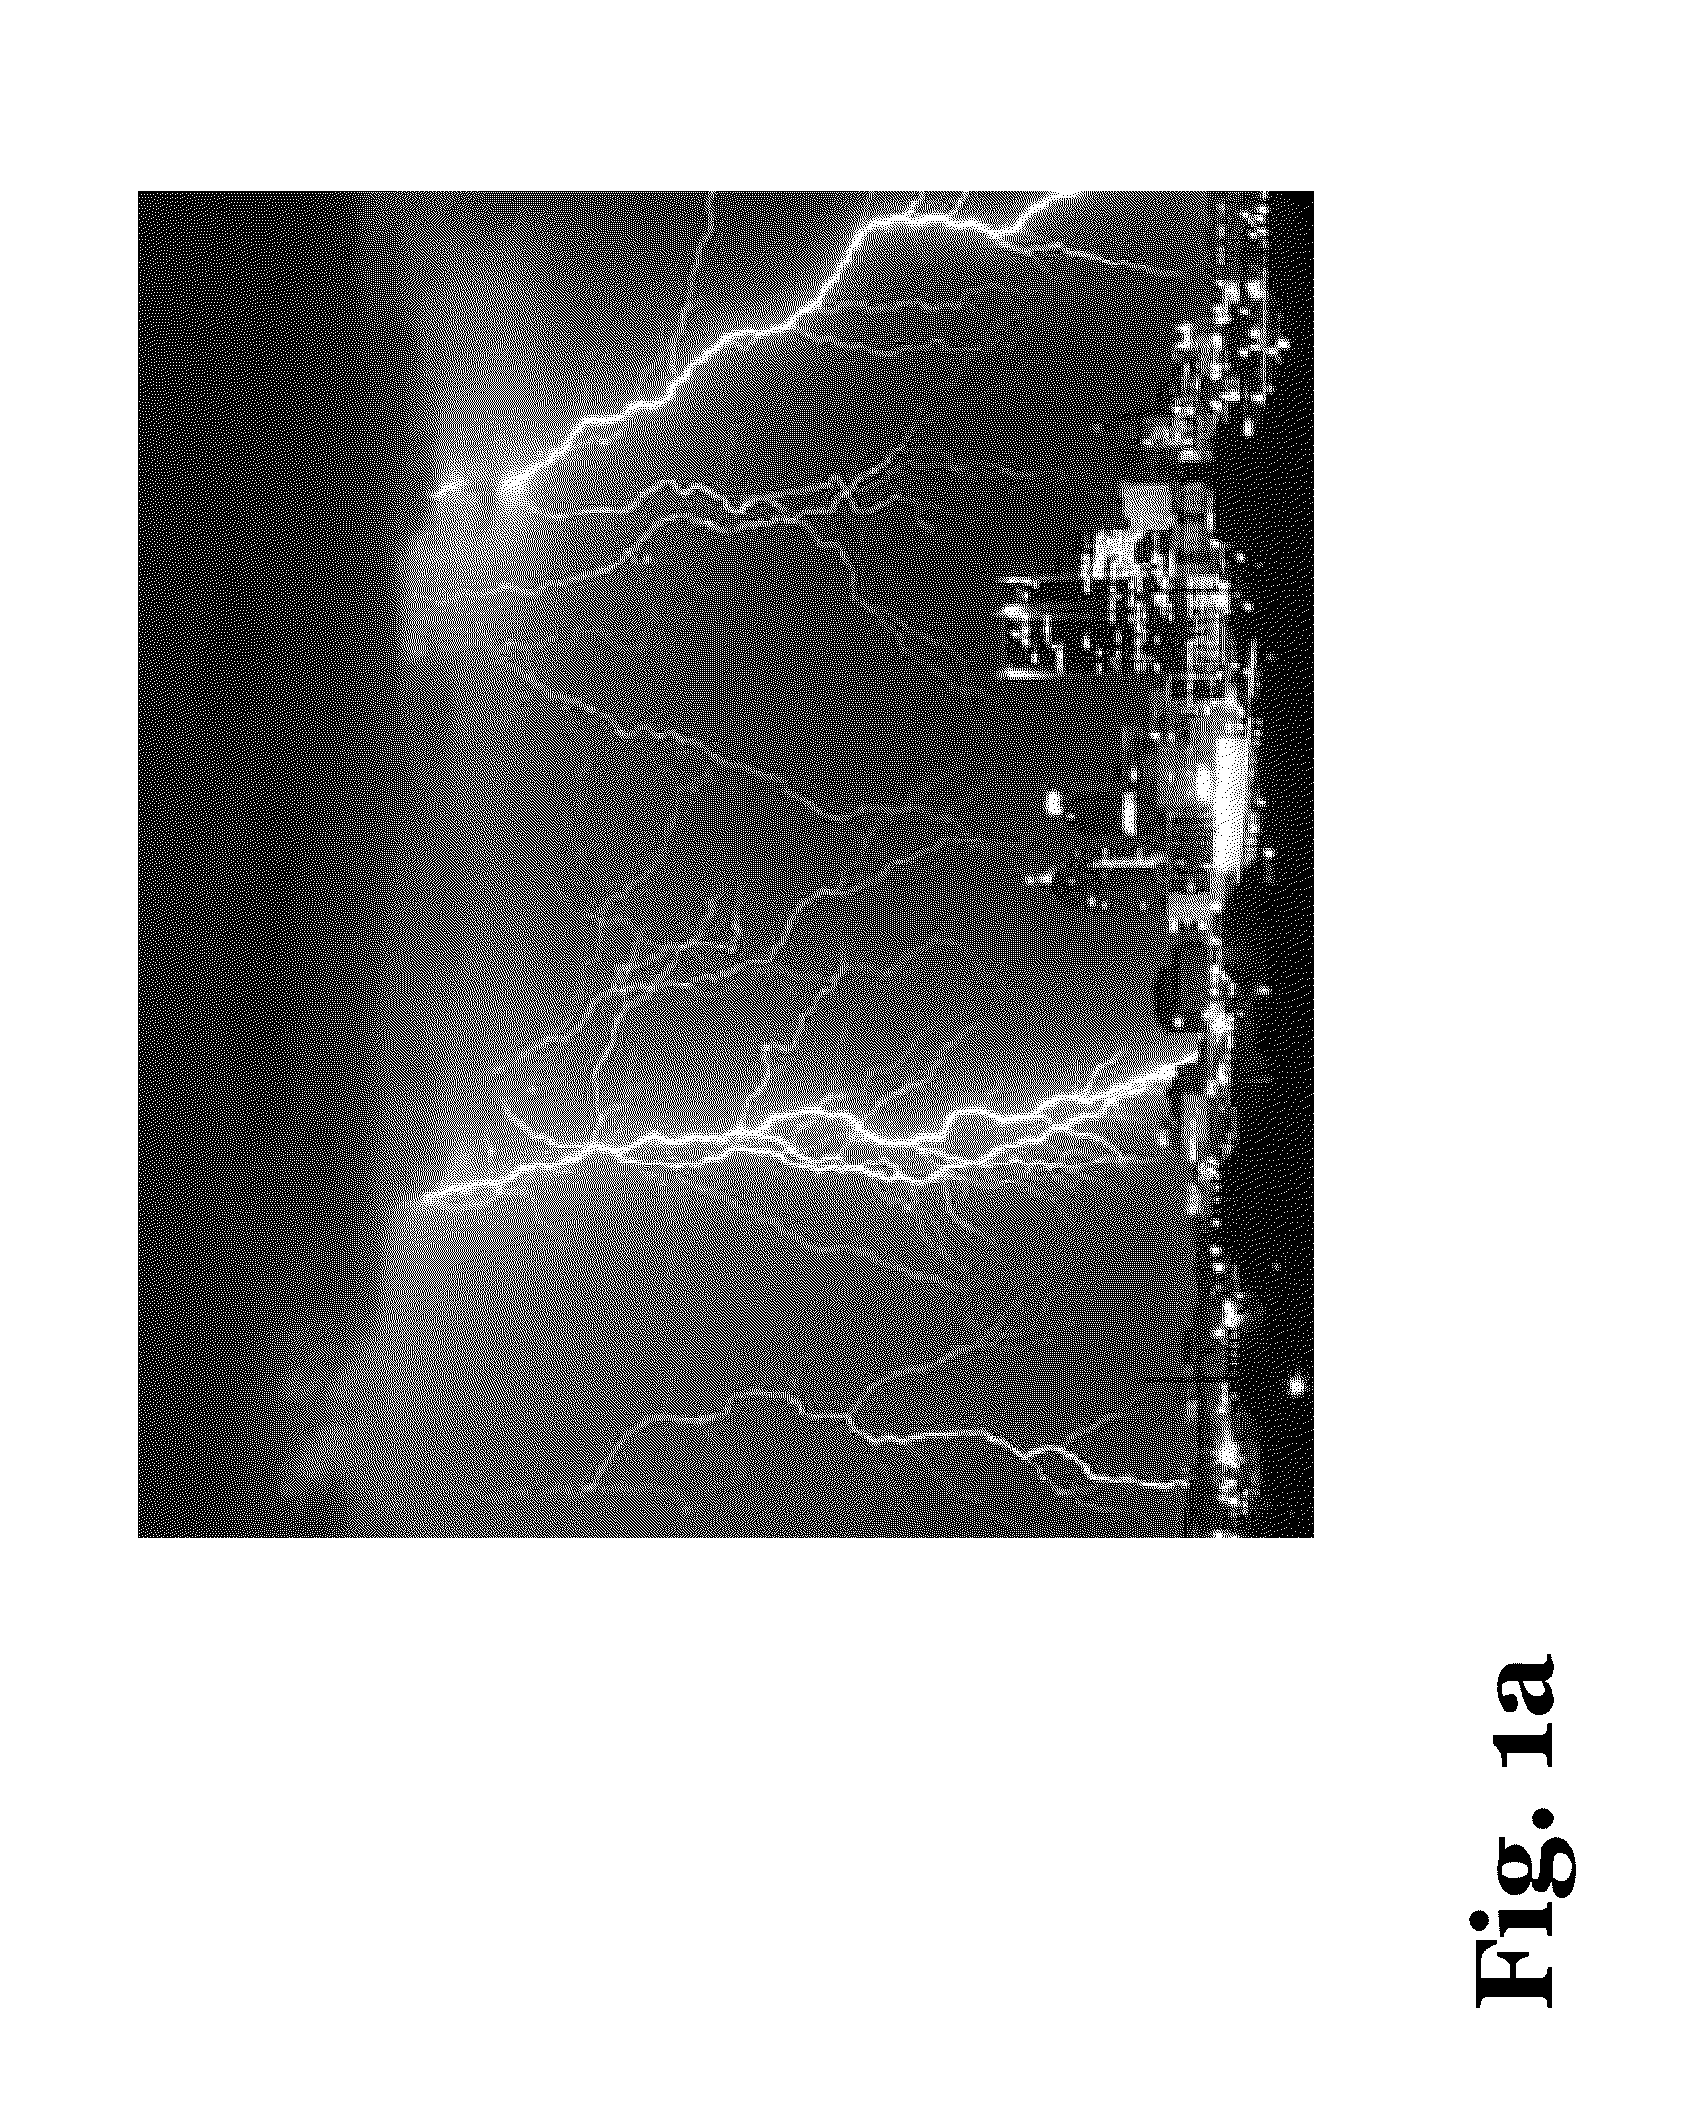 Method of atmospheric discharge energy conversion, storage and distribution